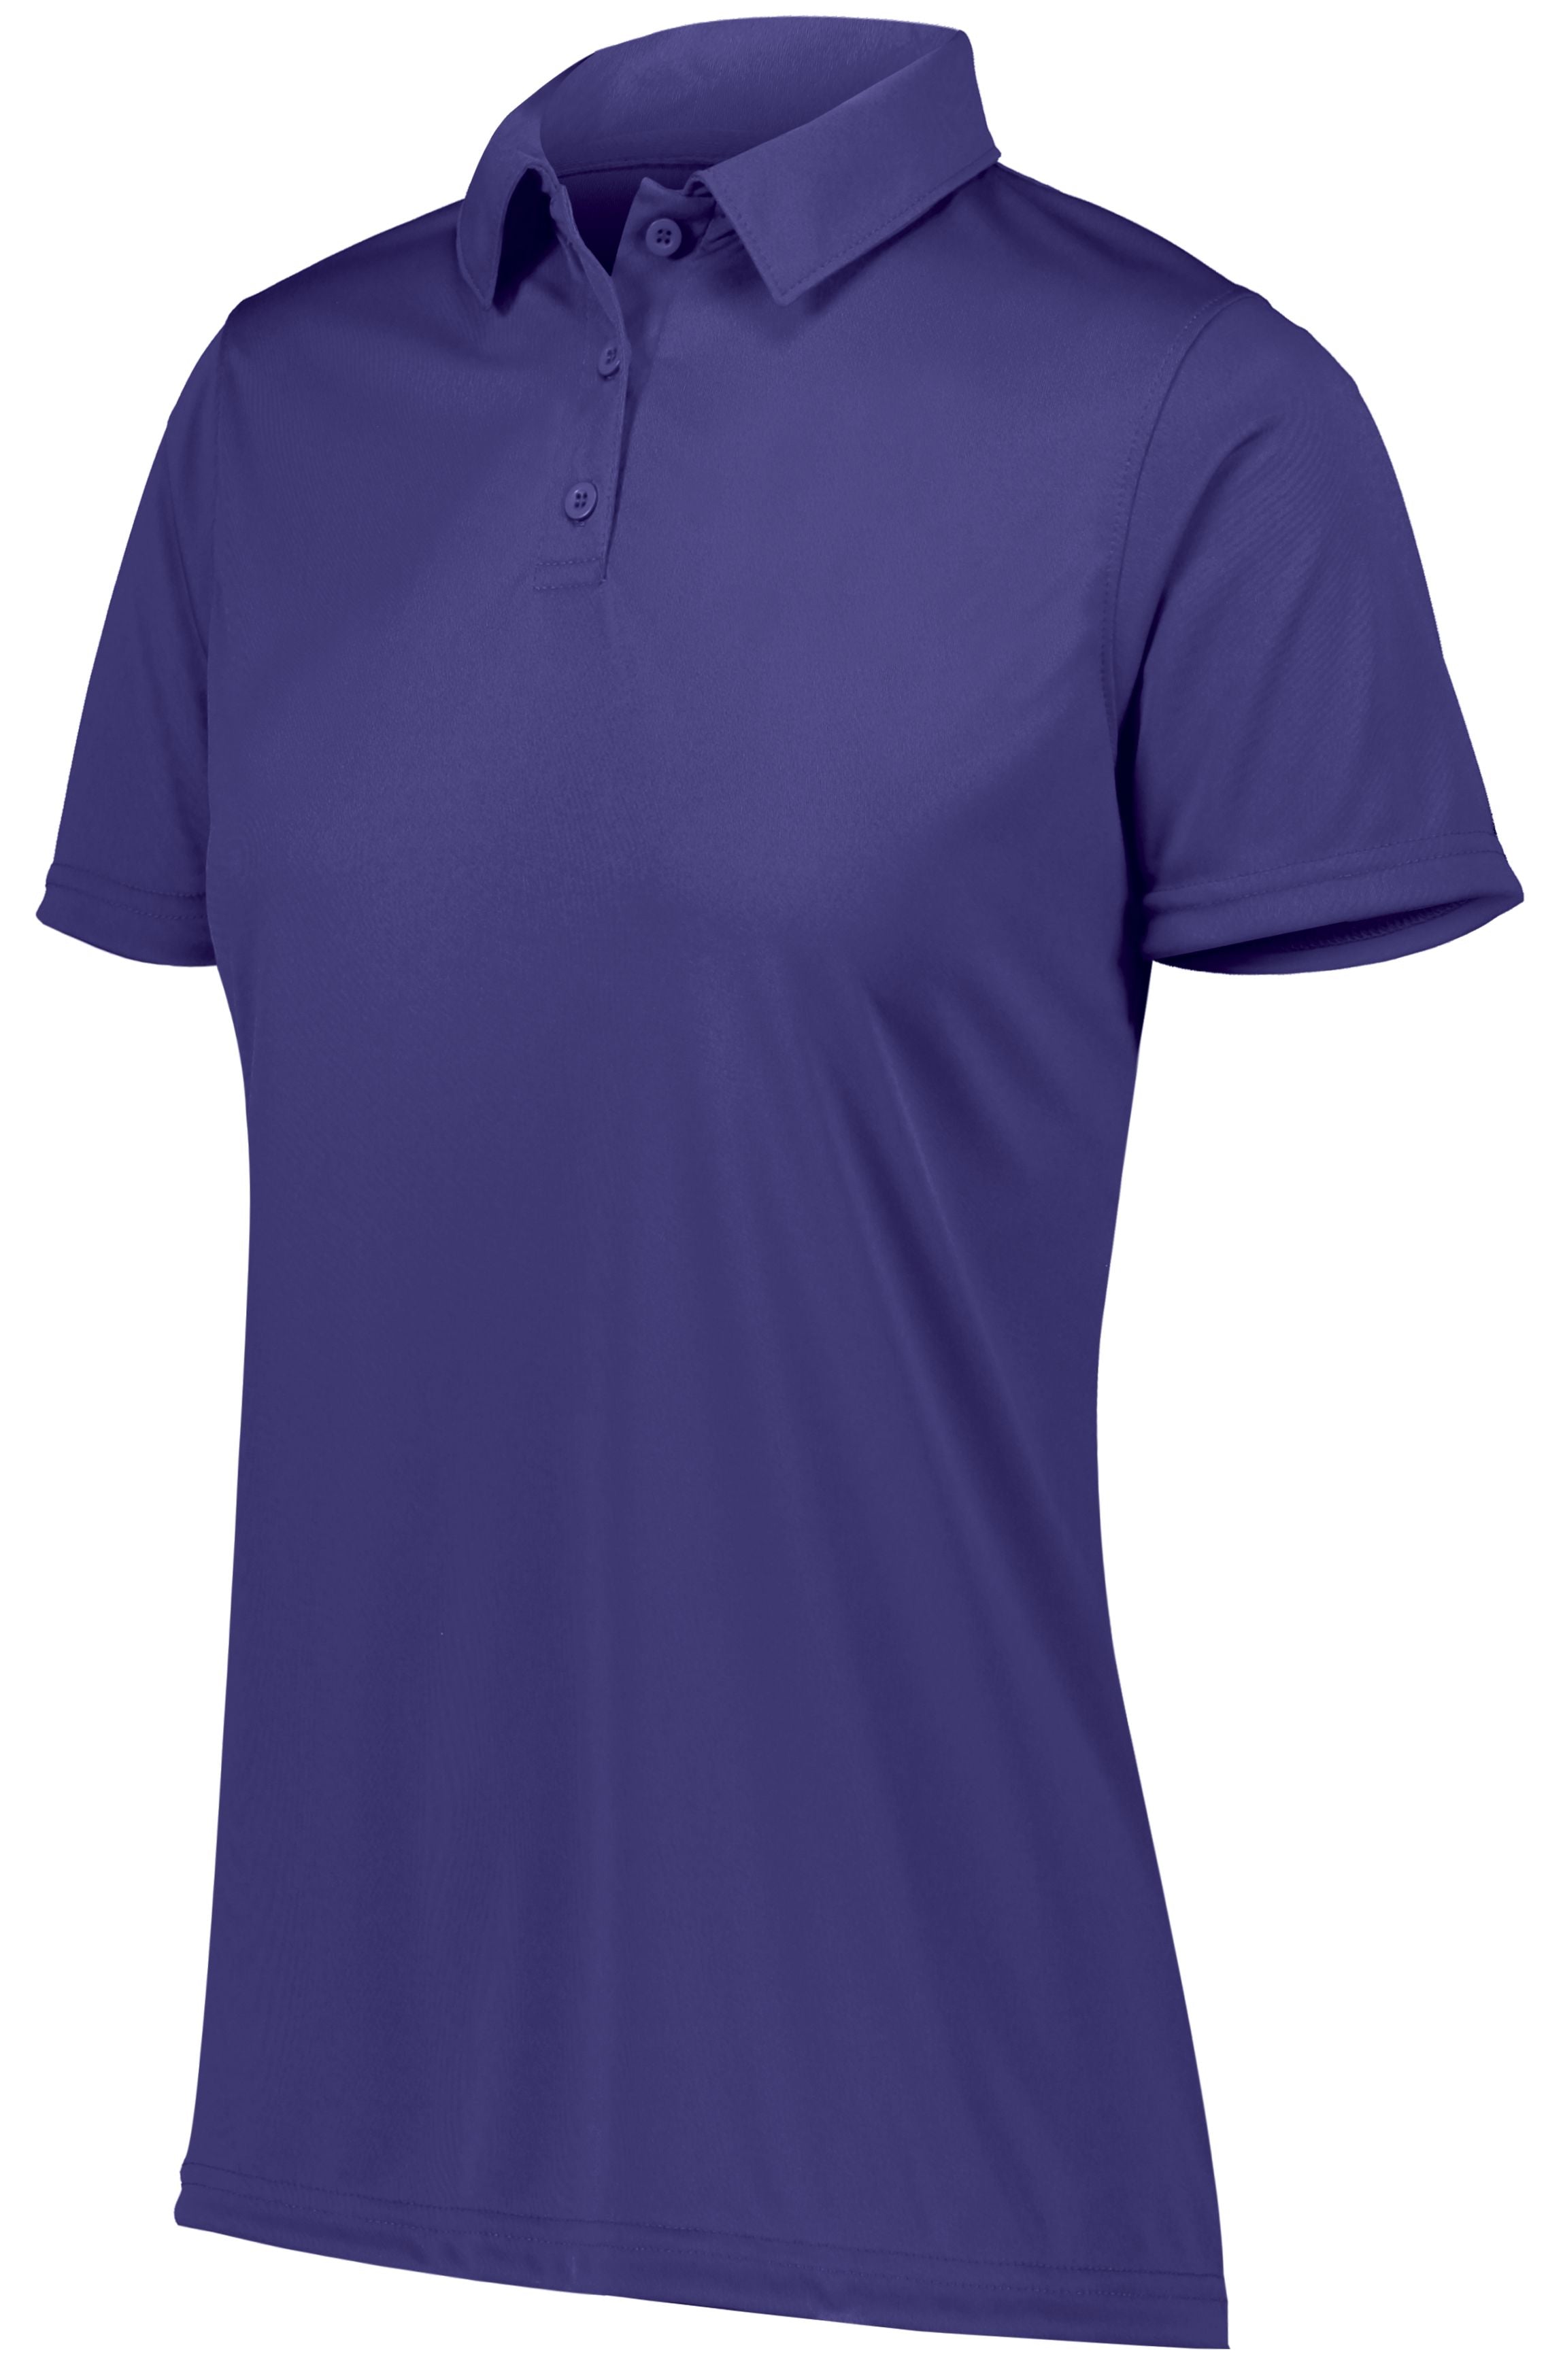 Augusta Sportswear Ladies Vital Polo in Purple (Hlw)  -Part of the Ladies, Ladies-Polo, Polos, Augusta-Products, Shirts product lines at KanaleyCreations.com